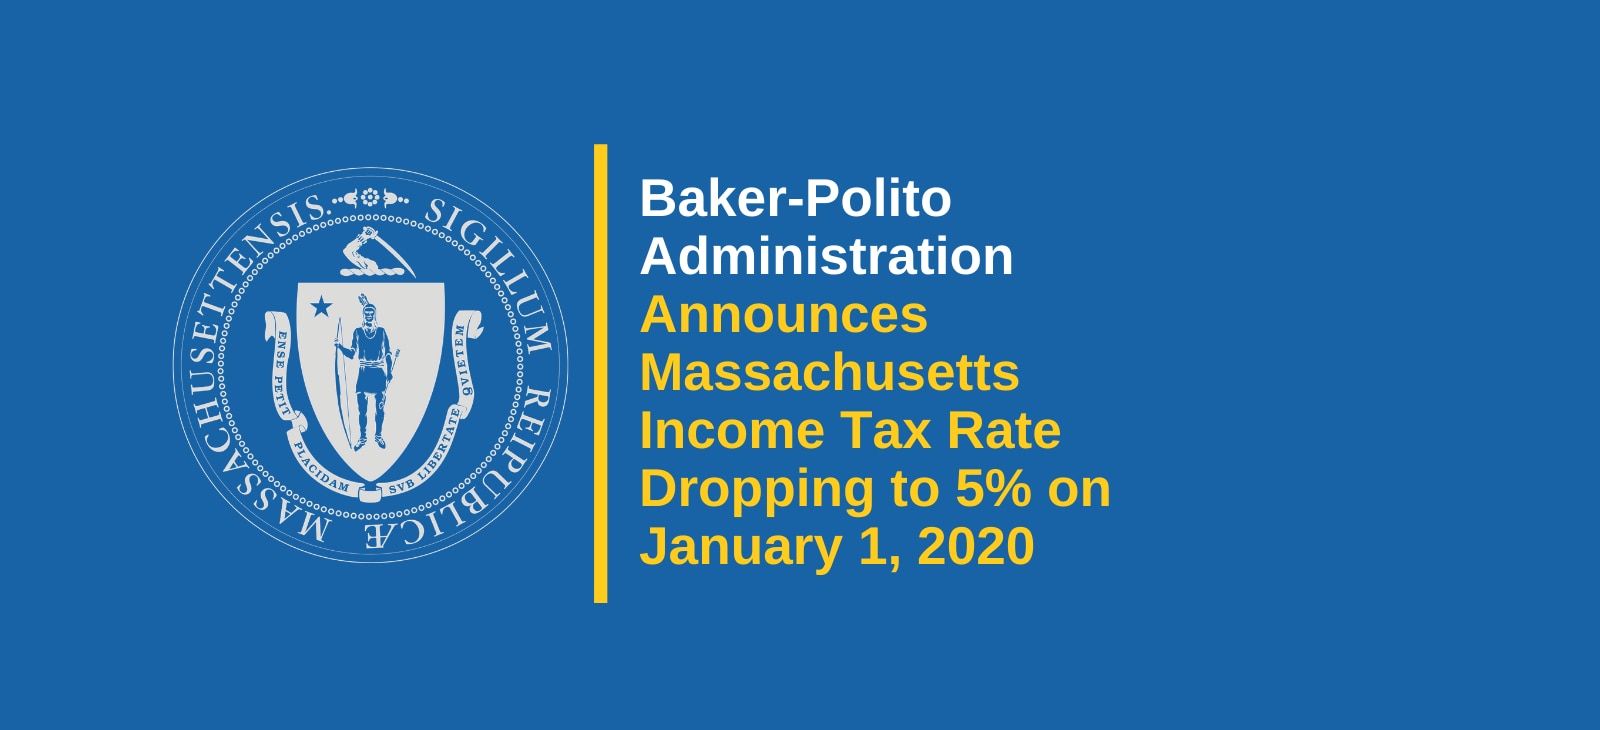 Baker-Polito Administration Announces Massachusetts Income Tax Rate Dropping to 5% on January 1, 2020